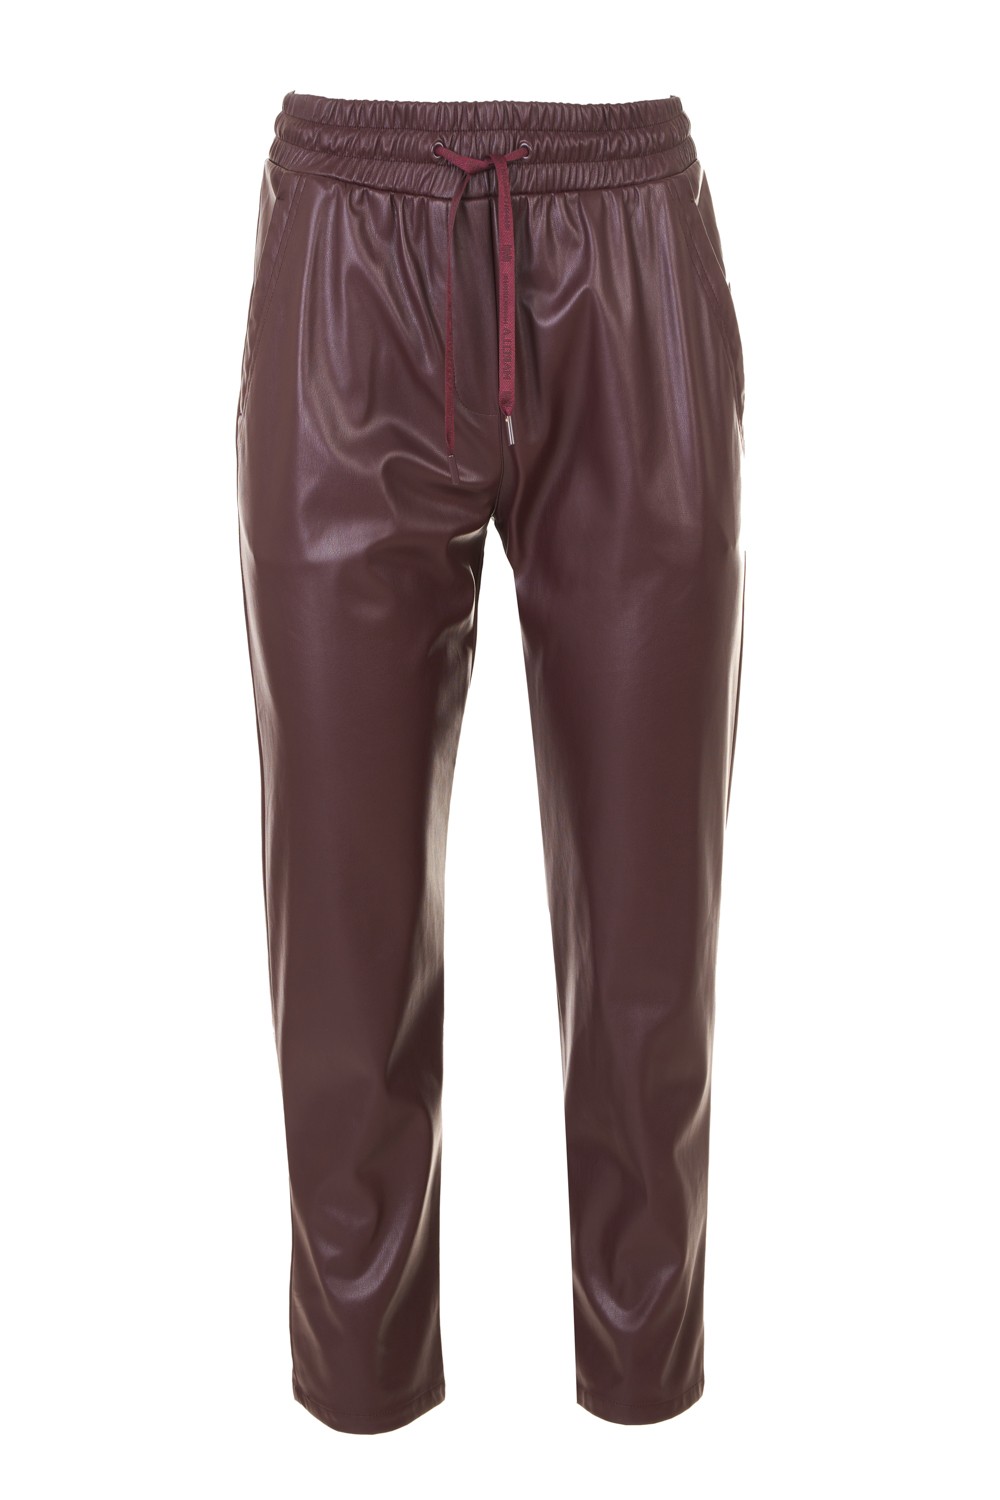 Eco Leather Trousers with Drawstring Waistband (Marella)